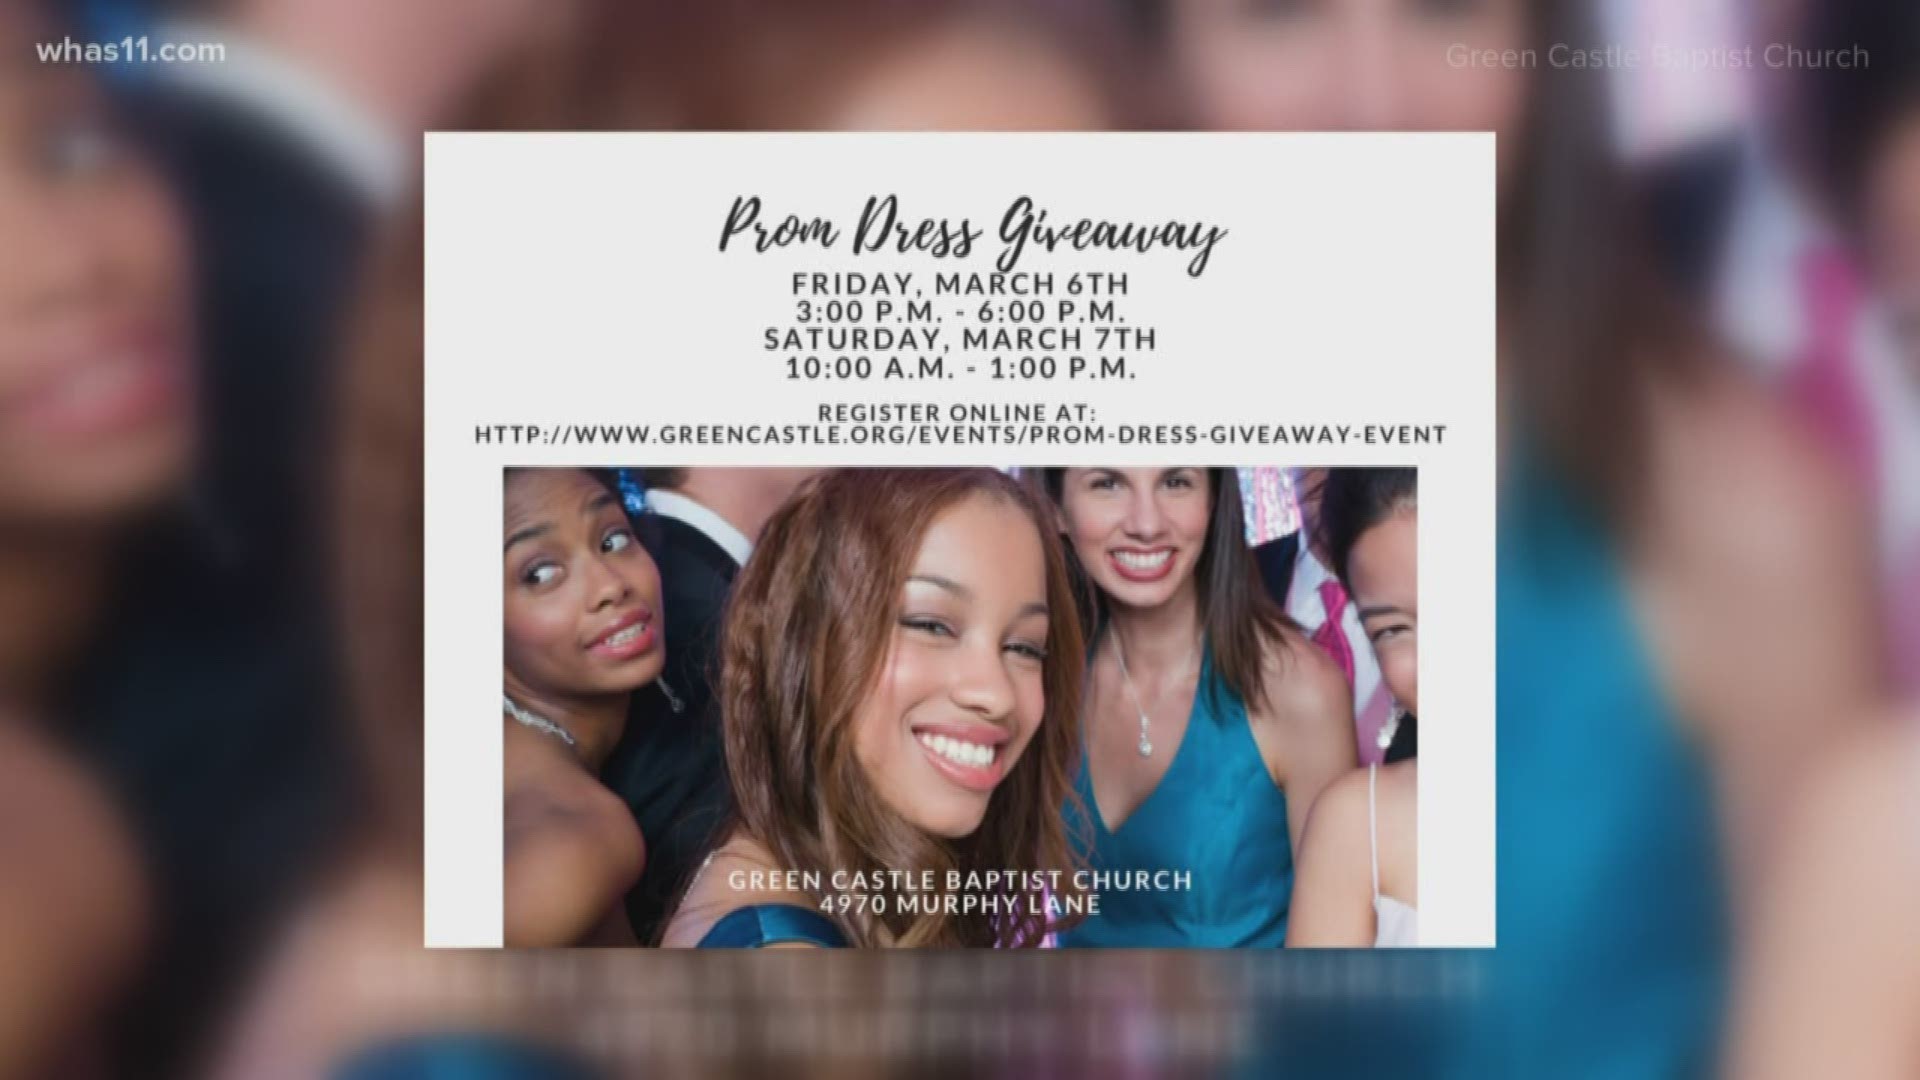 The annual Prom Dress Giveaway at Green Castle Baptist Church lets high school girls pick out a dress, jewelry and shoes for prom.